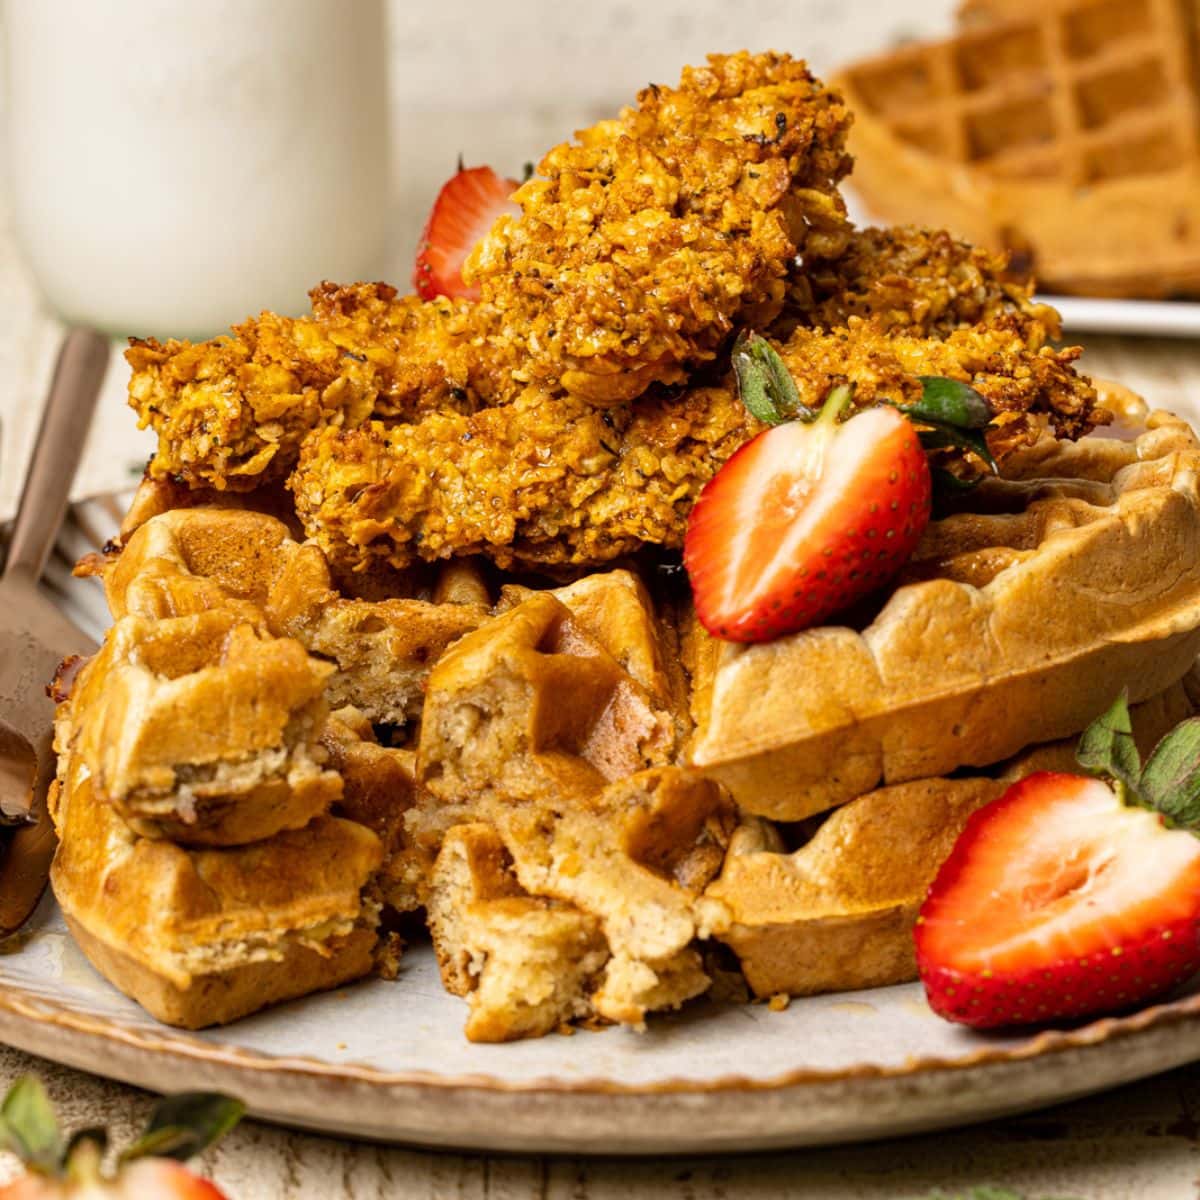 Chicken and waffles on a white plate on a white wooden table with a glass of milk and strawberries.